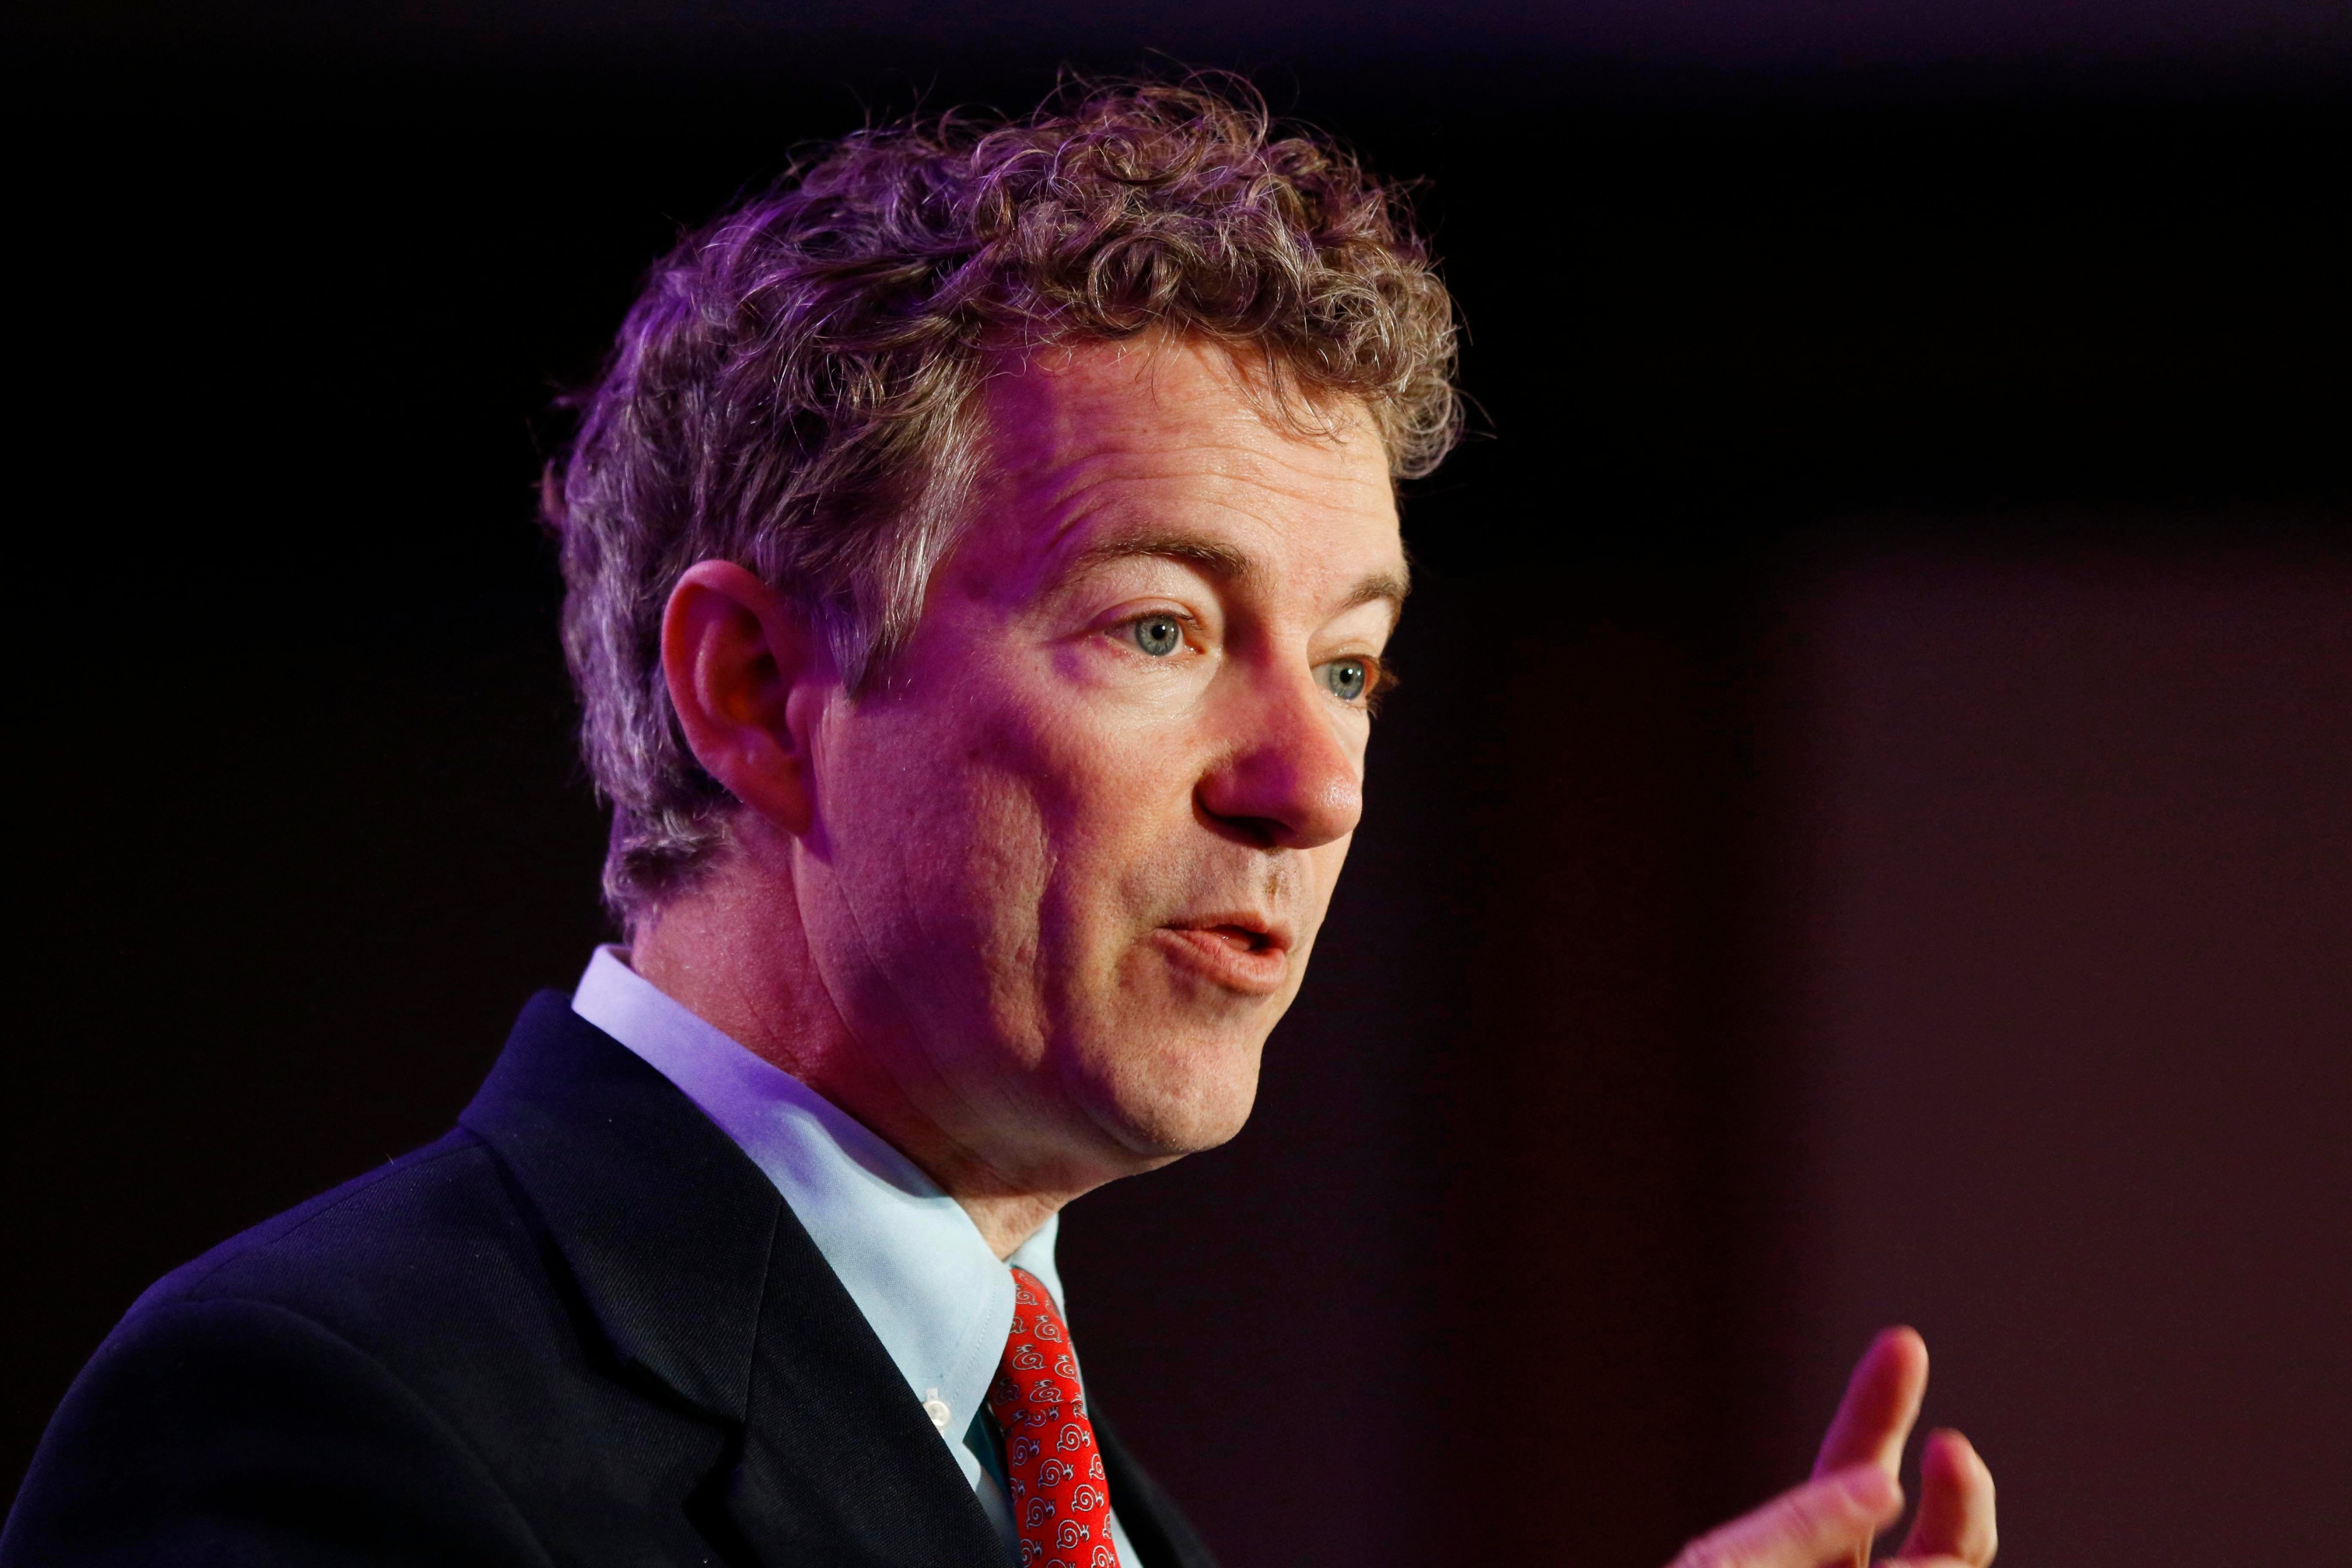 Senator Rand Paul of Kentucky speaks to the crowd at the Tea Party Patriots 5th anniversary conference at the Hyatt Regency Hotel in Washington, D.C., on Feb. 27, 2014. (Mark Peterson—Redux)